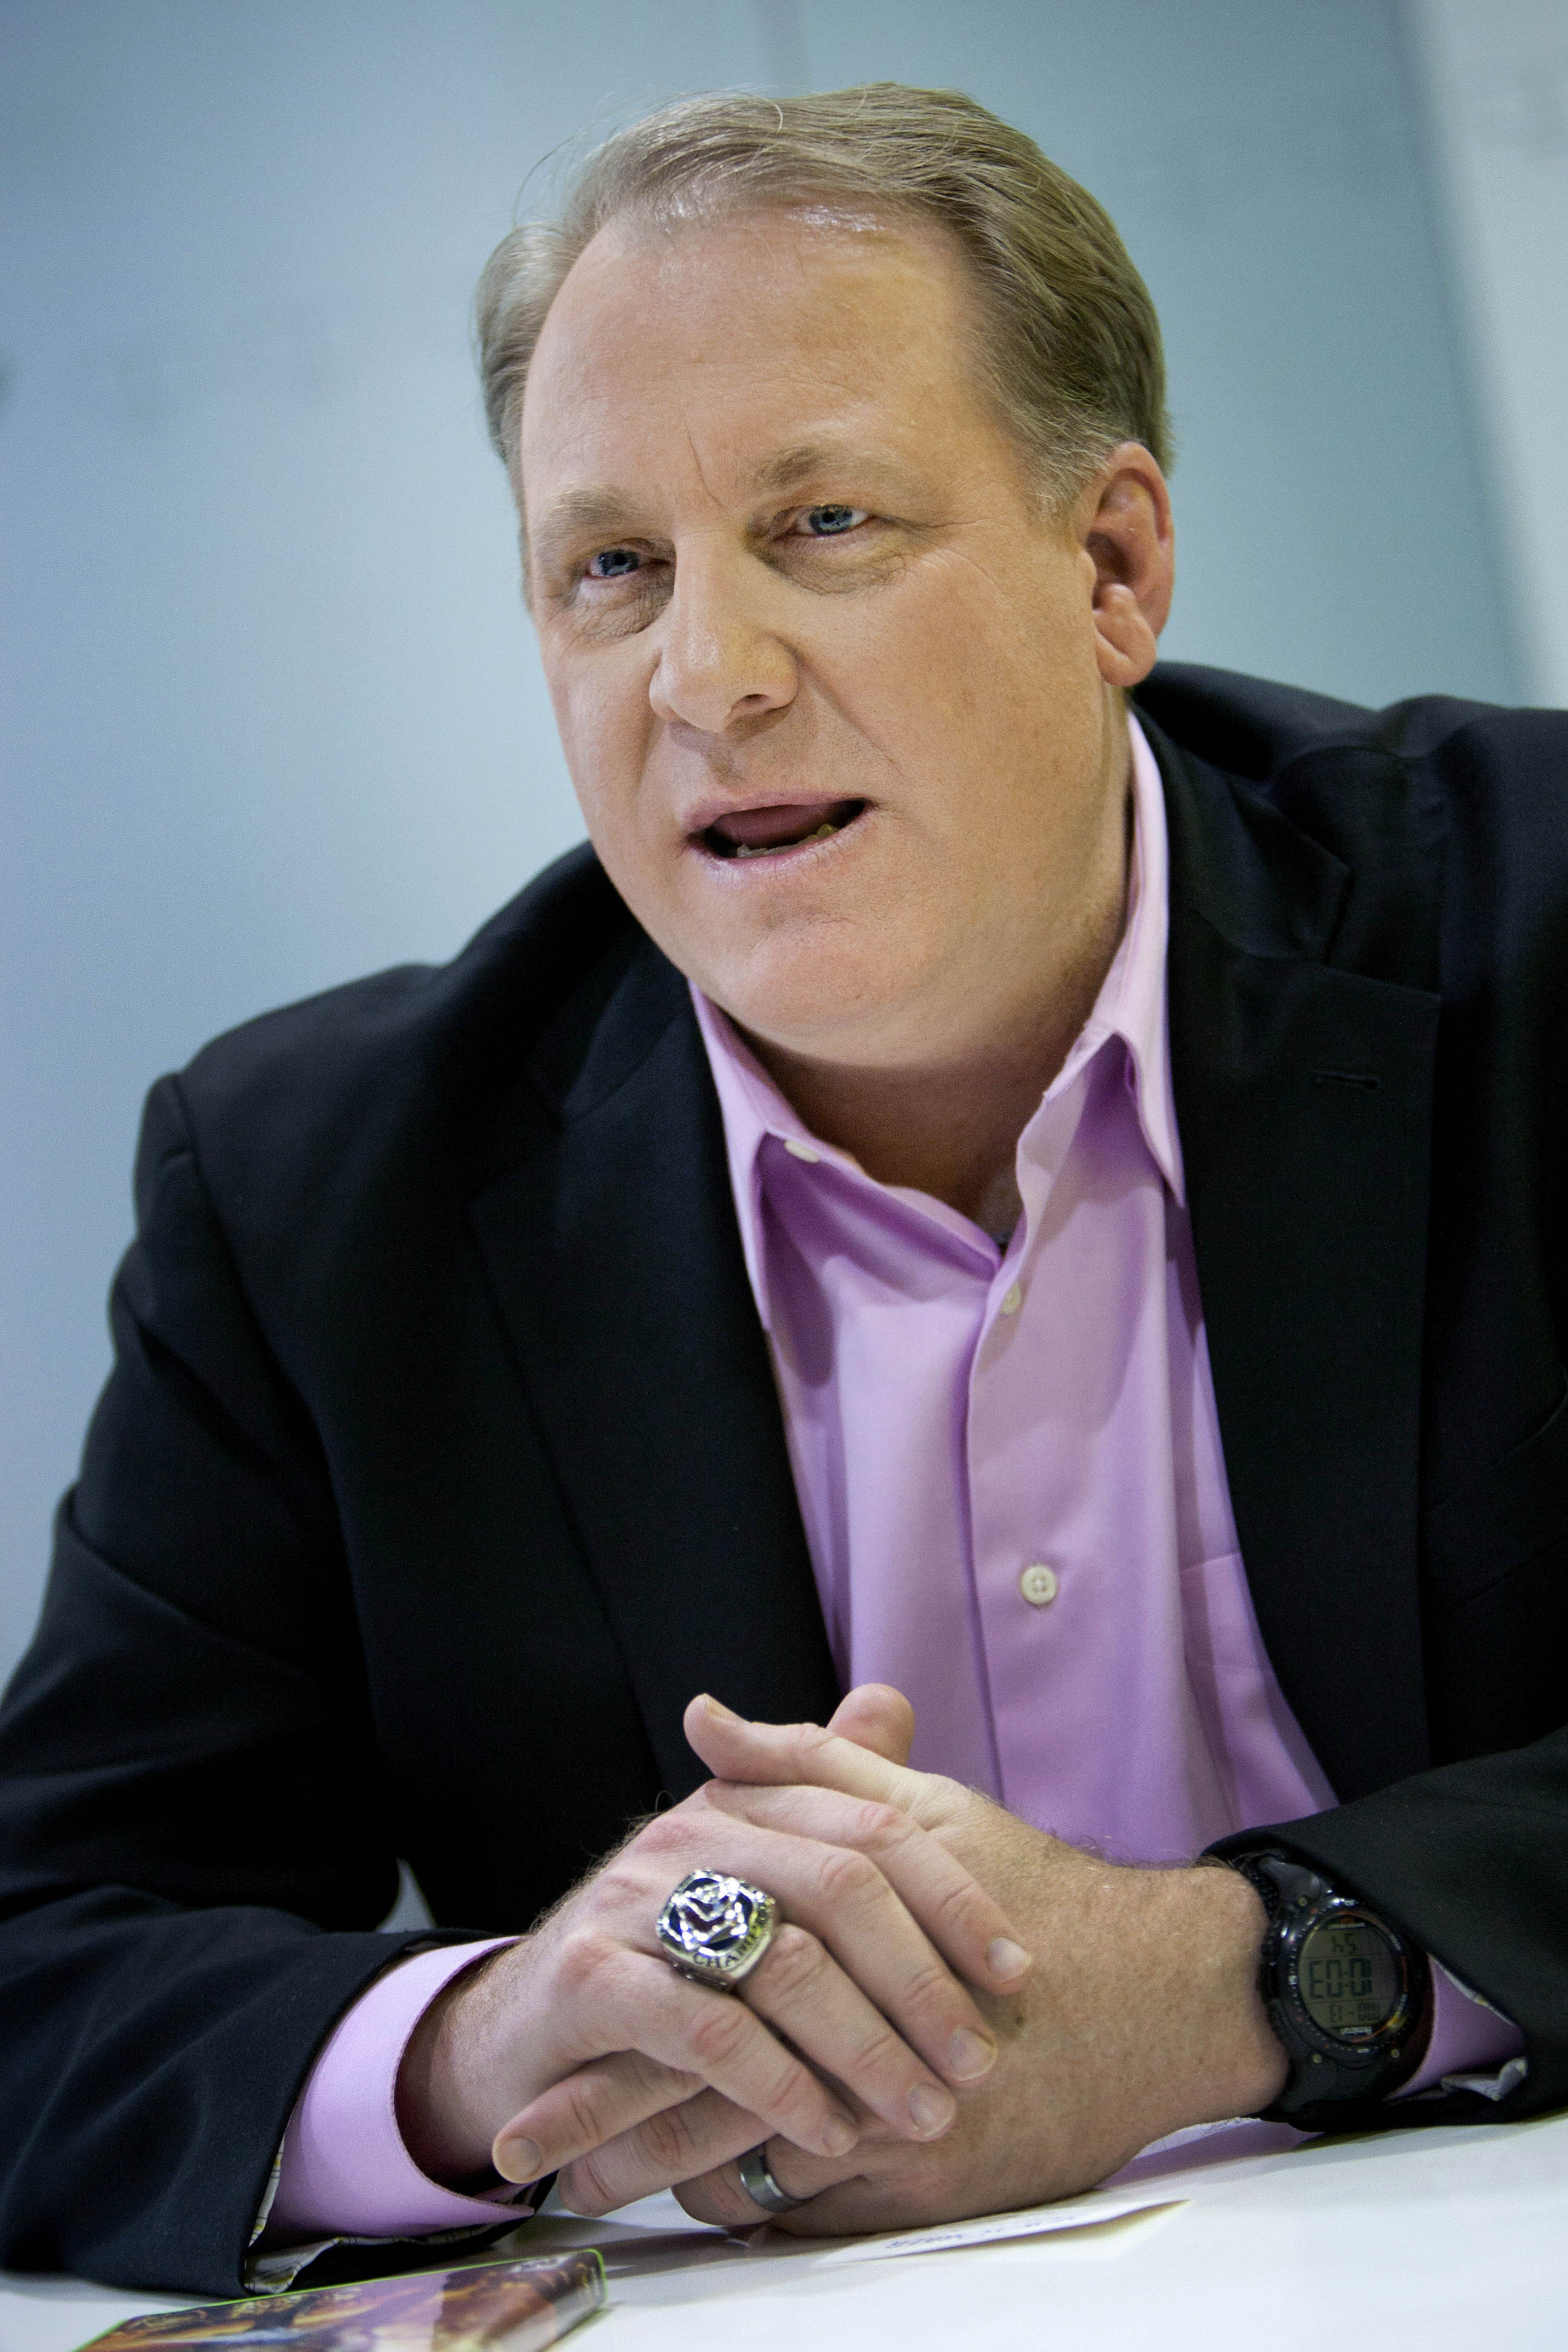 Curt Schilling, former Boston Red Sox pitcher, speaks during an interview in New York on Feb. 13, 2012. (Scott Eells—Bloomberg/Getty Images)